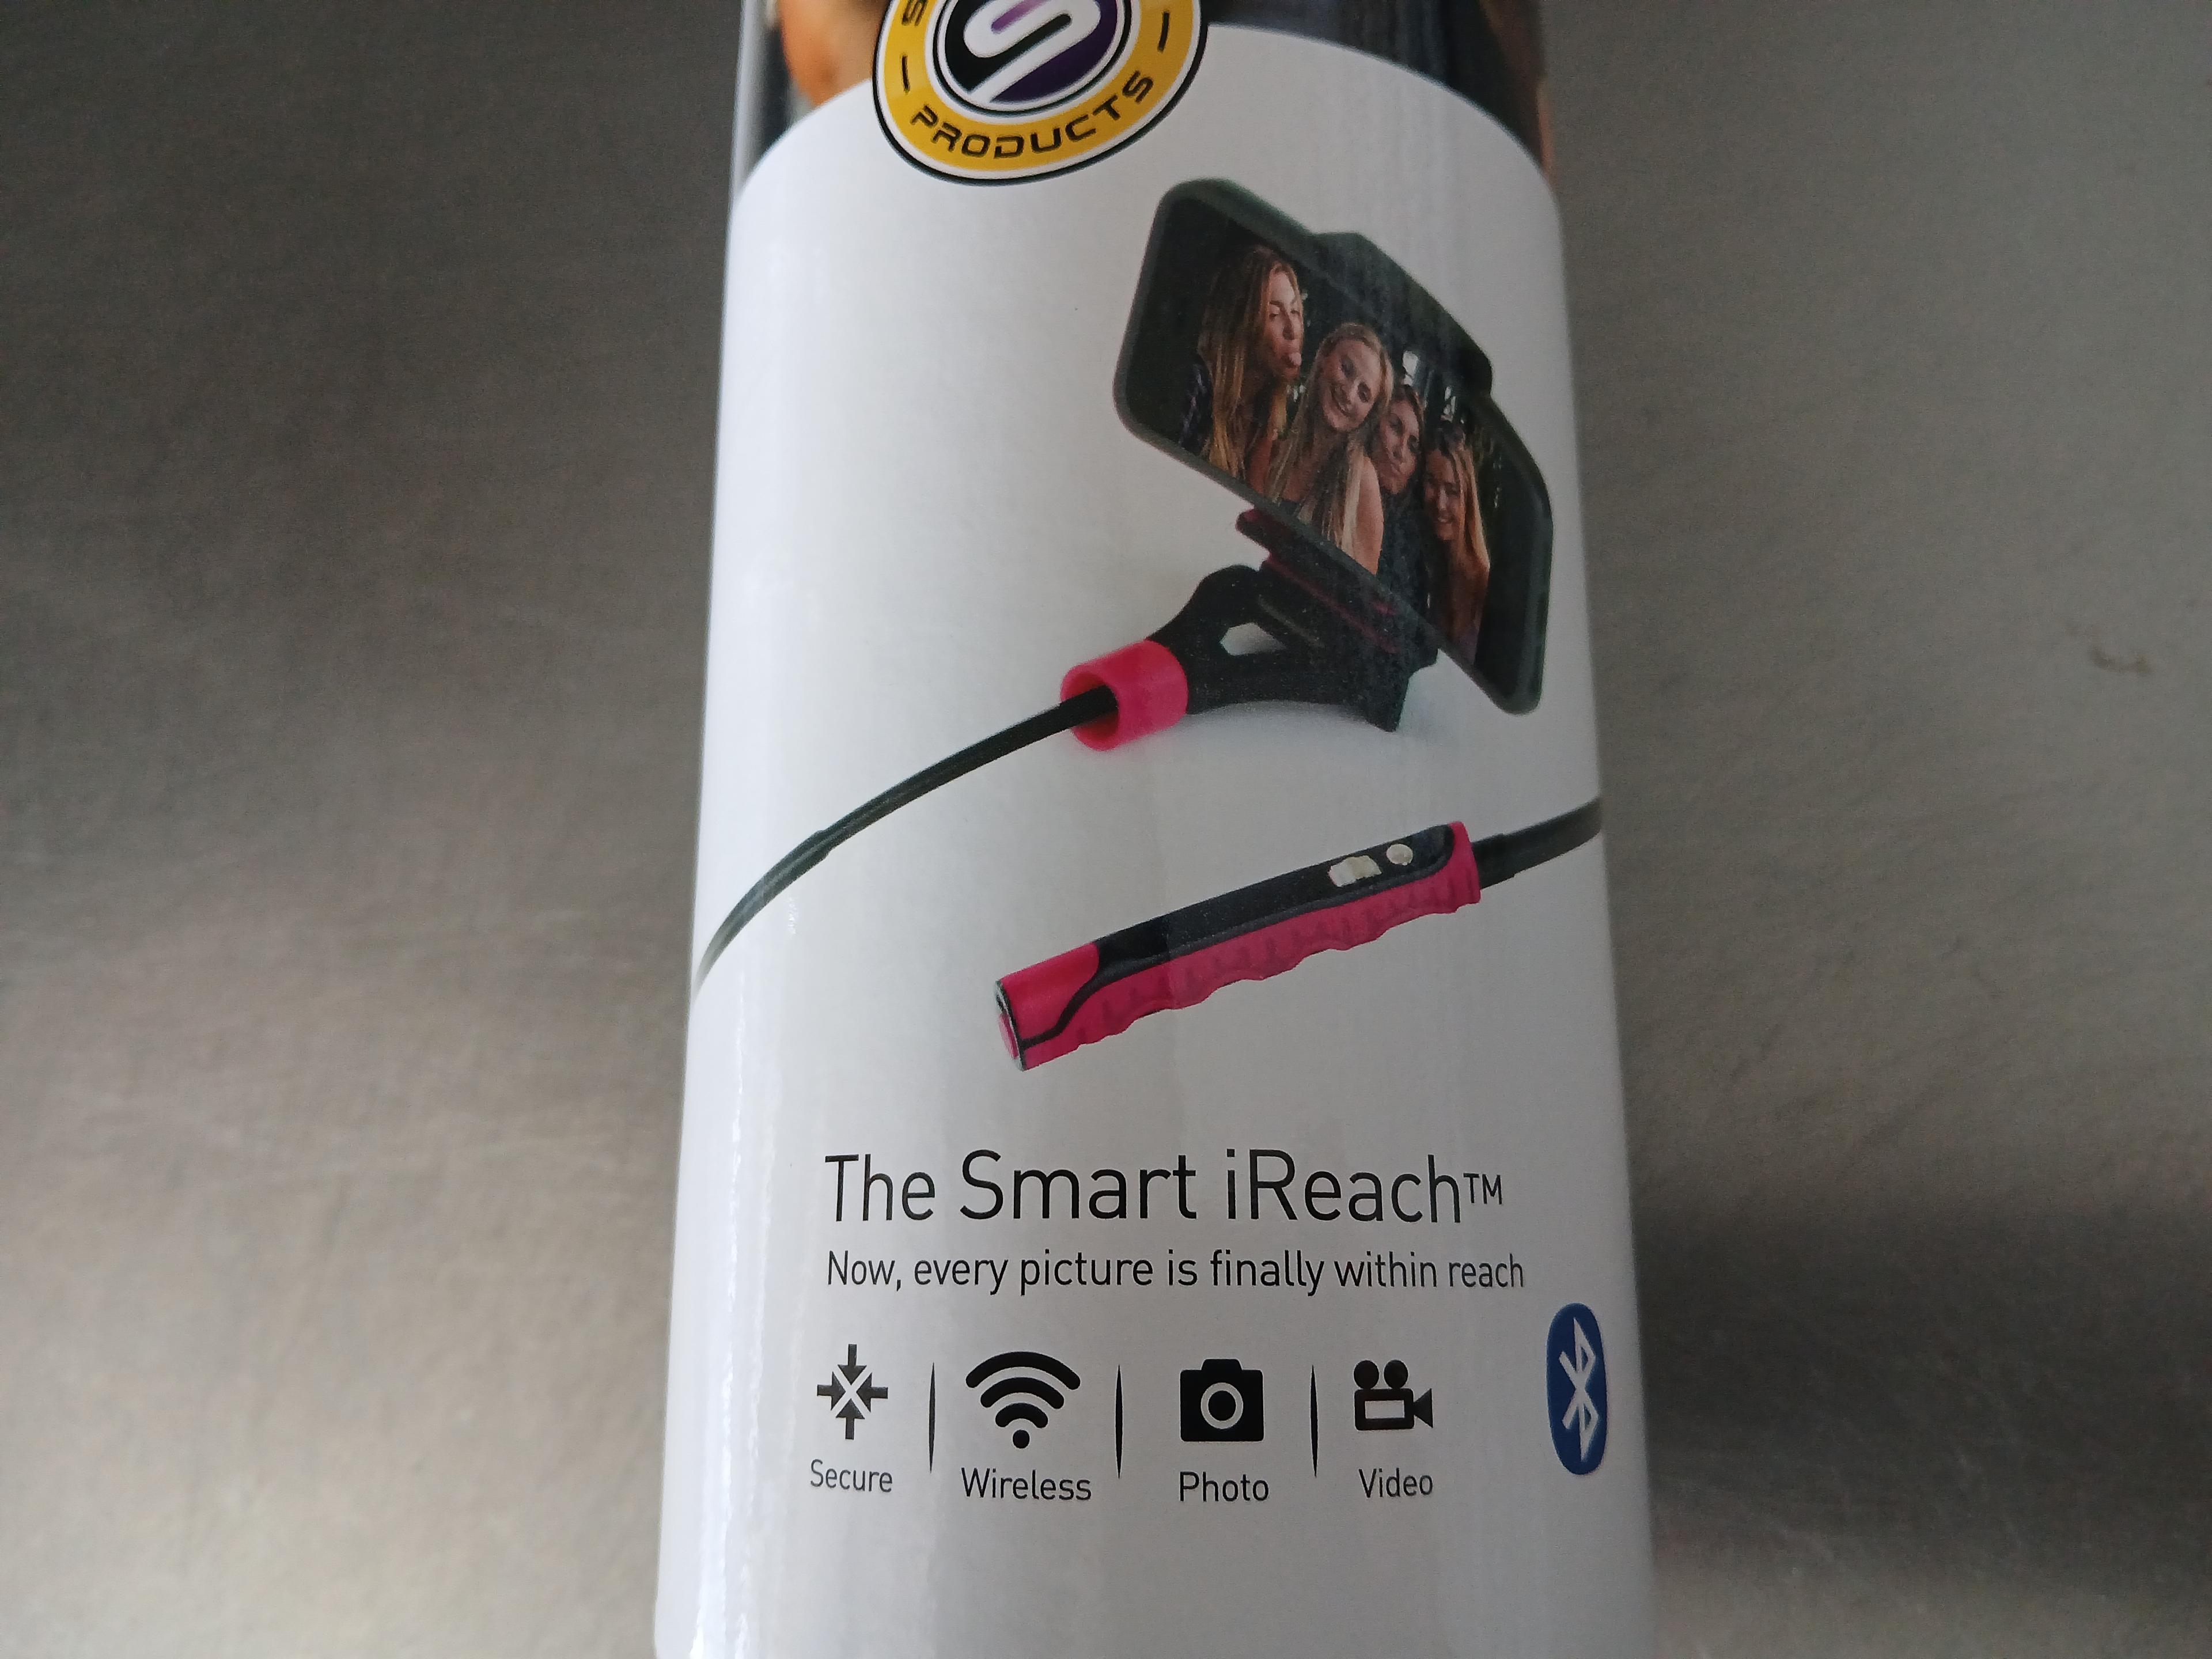 BRAND NEW Wireless Selfie Stick / I-REACH Wireless Selfie Stick / Individually packaged for easy res